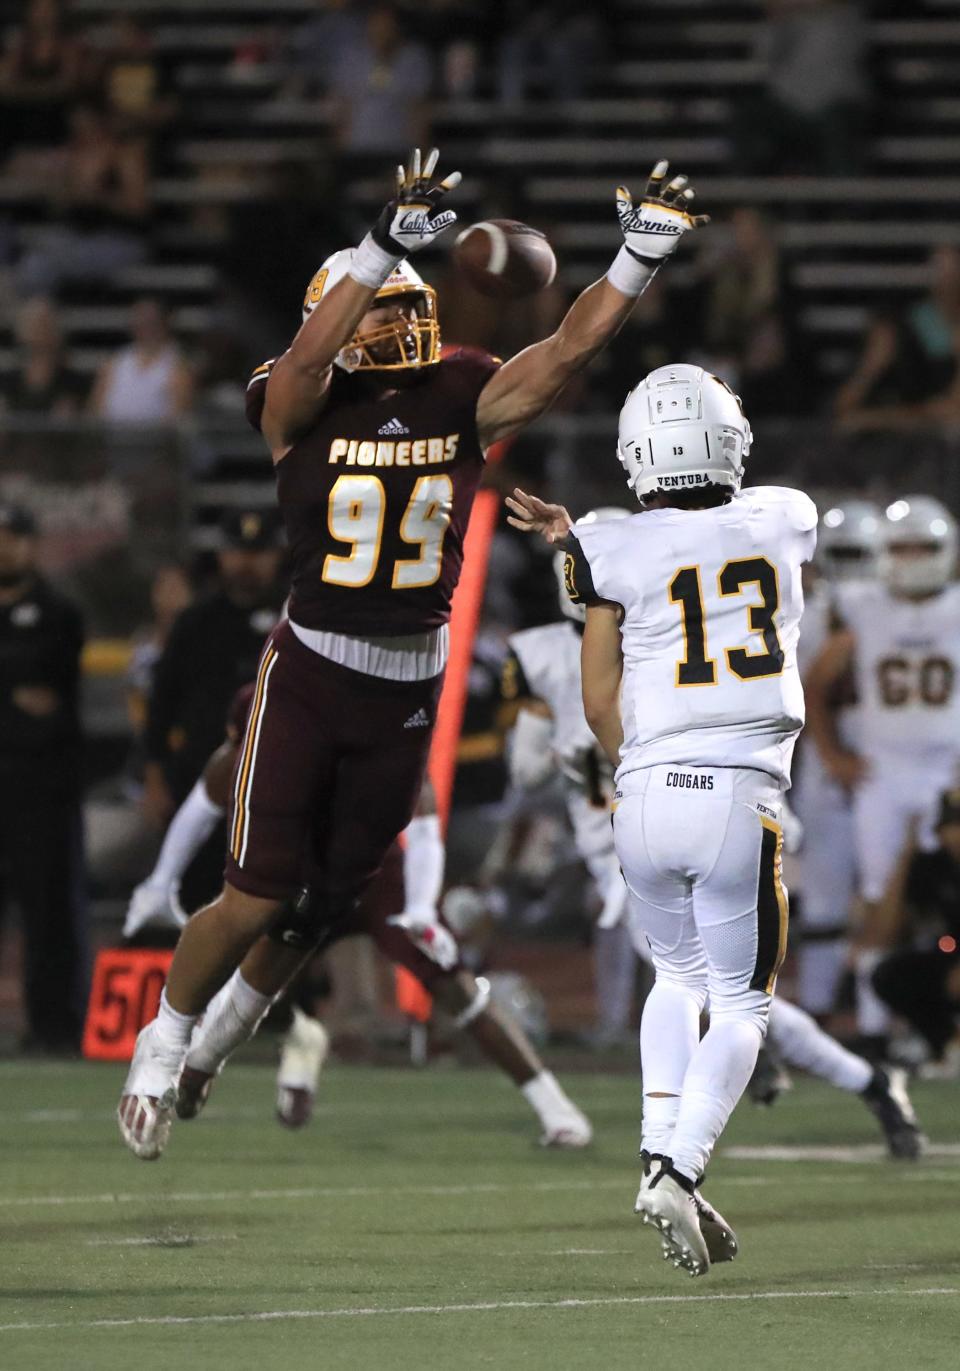 Simi Valley's Carson Mott knocks down a pass by Ventura's Joey Reynoso during the third quarter of the Pioneers’ 49-3 win in a season-opening game at Simi Valley High on Aug. 19, 2022.